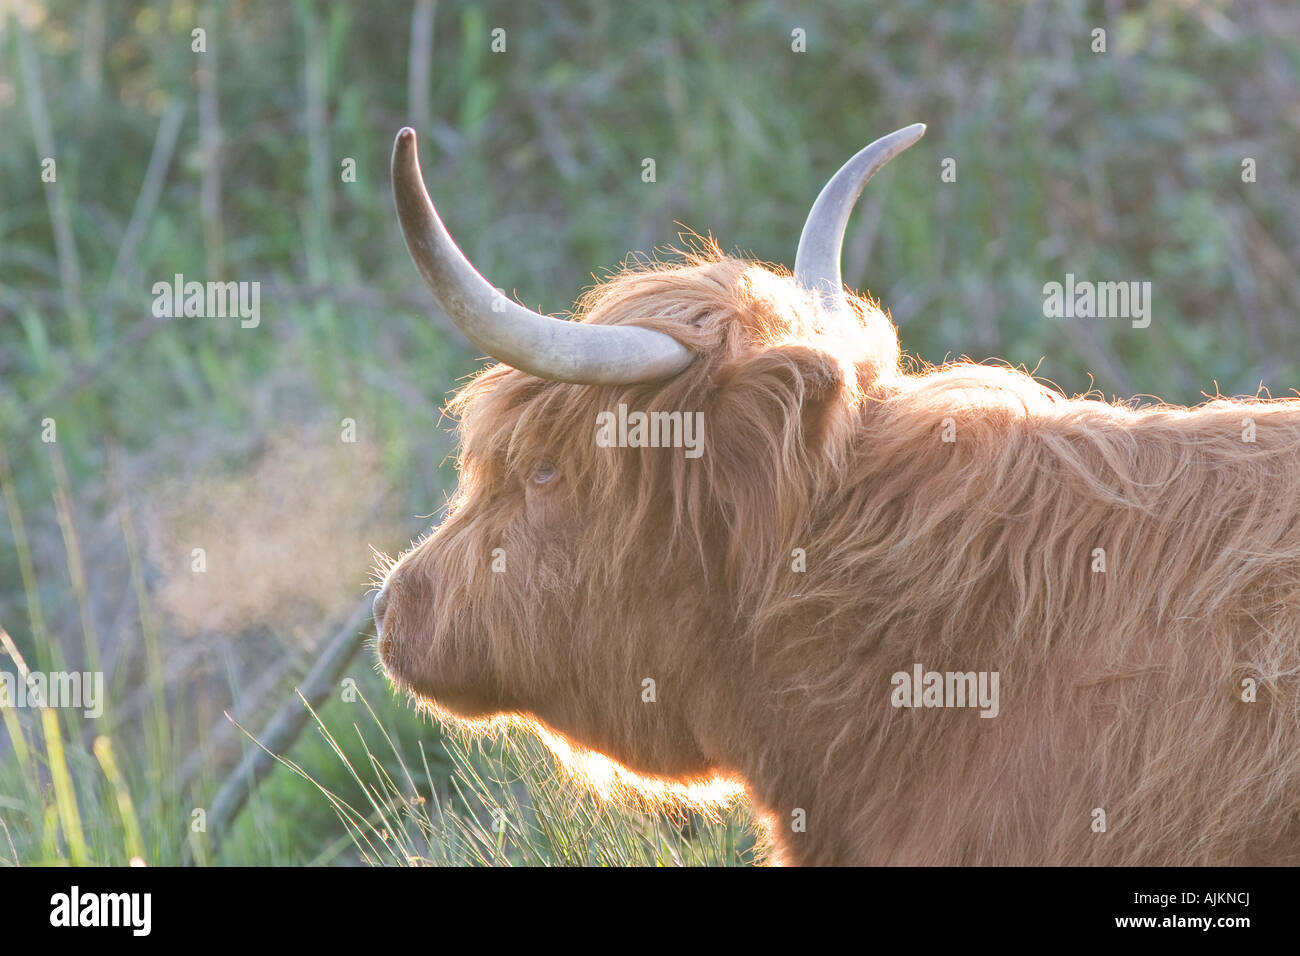 Highland Cow on Norfolk Grazing Marsh with Condensing Breath Stock Photo